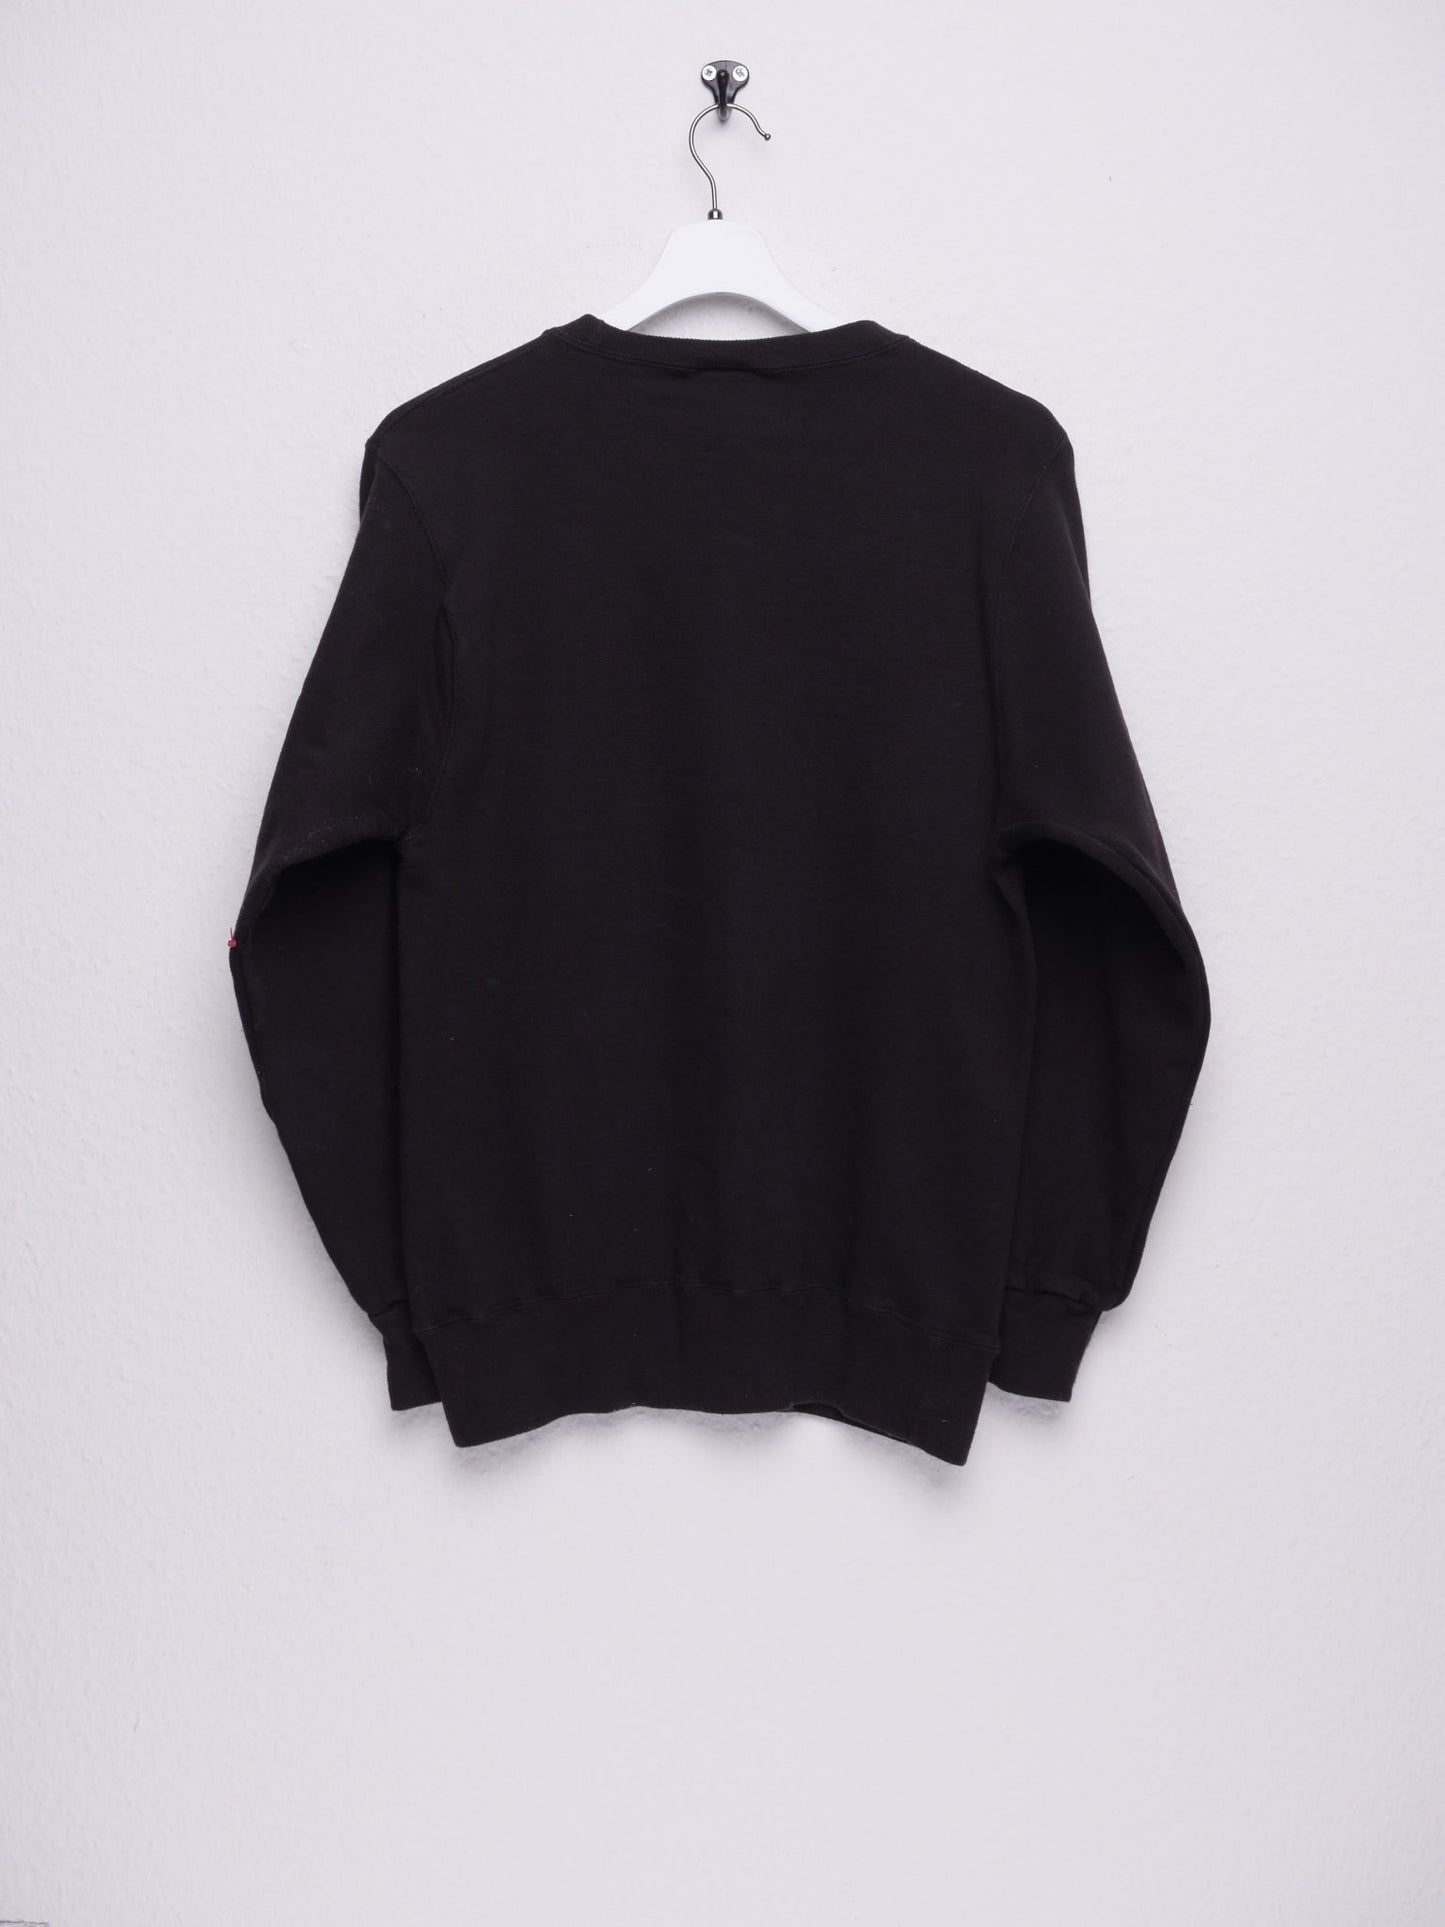 Champion 'Army Gadets' printed Graphic black Sweater - Peeces